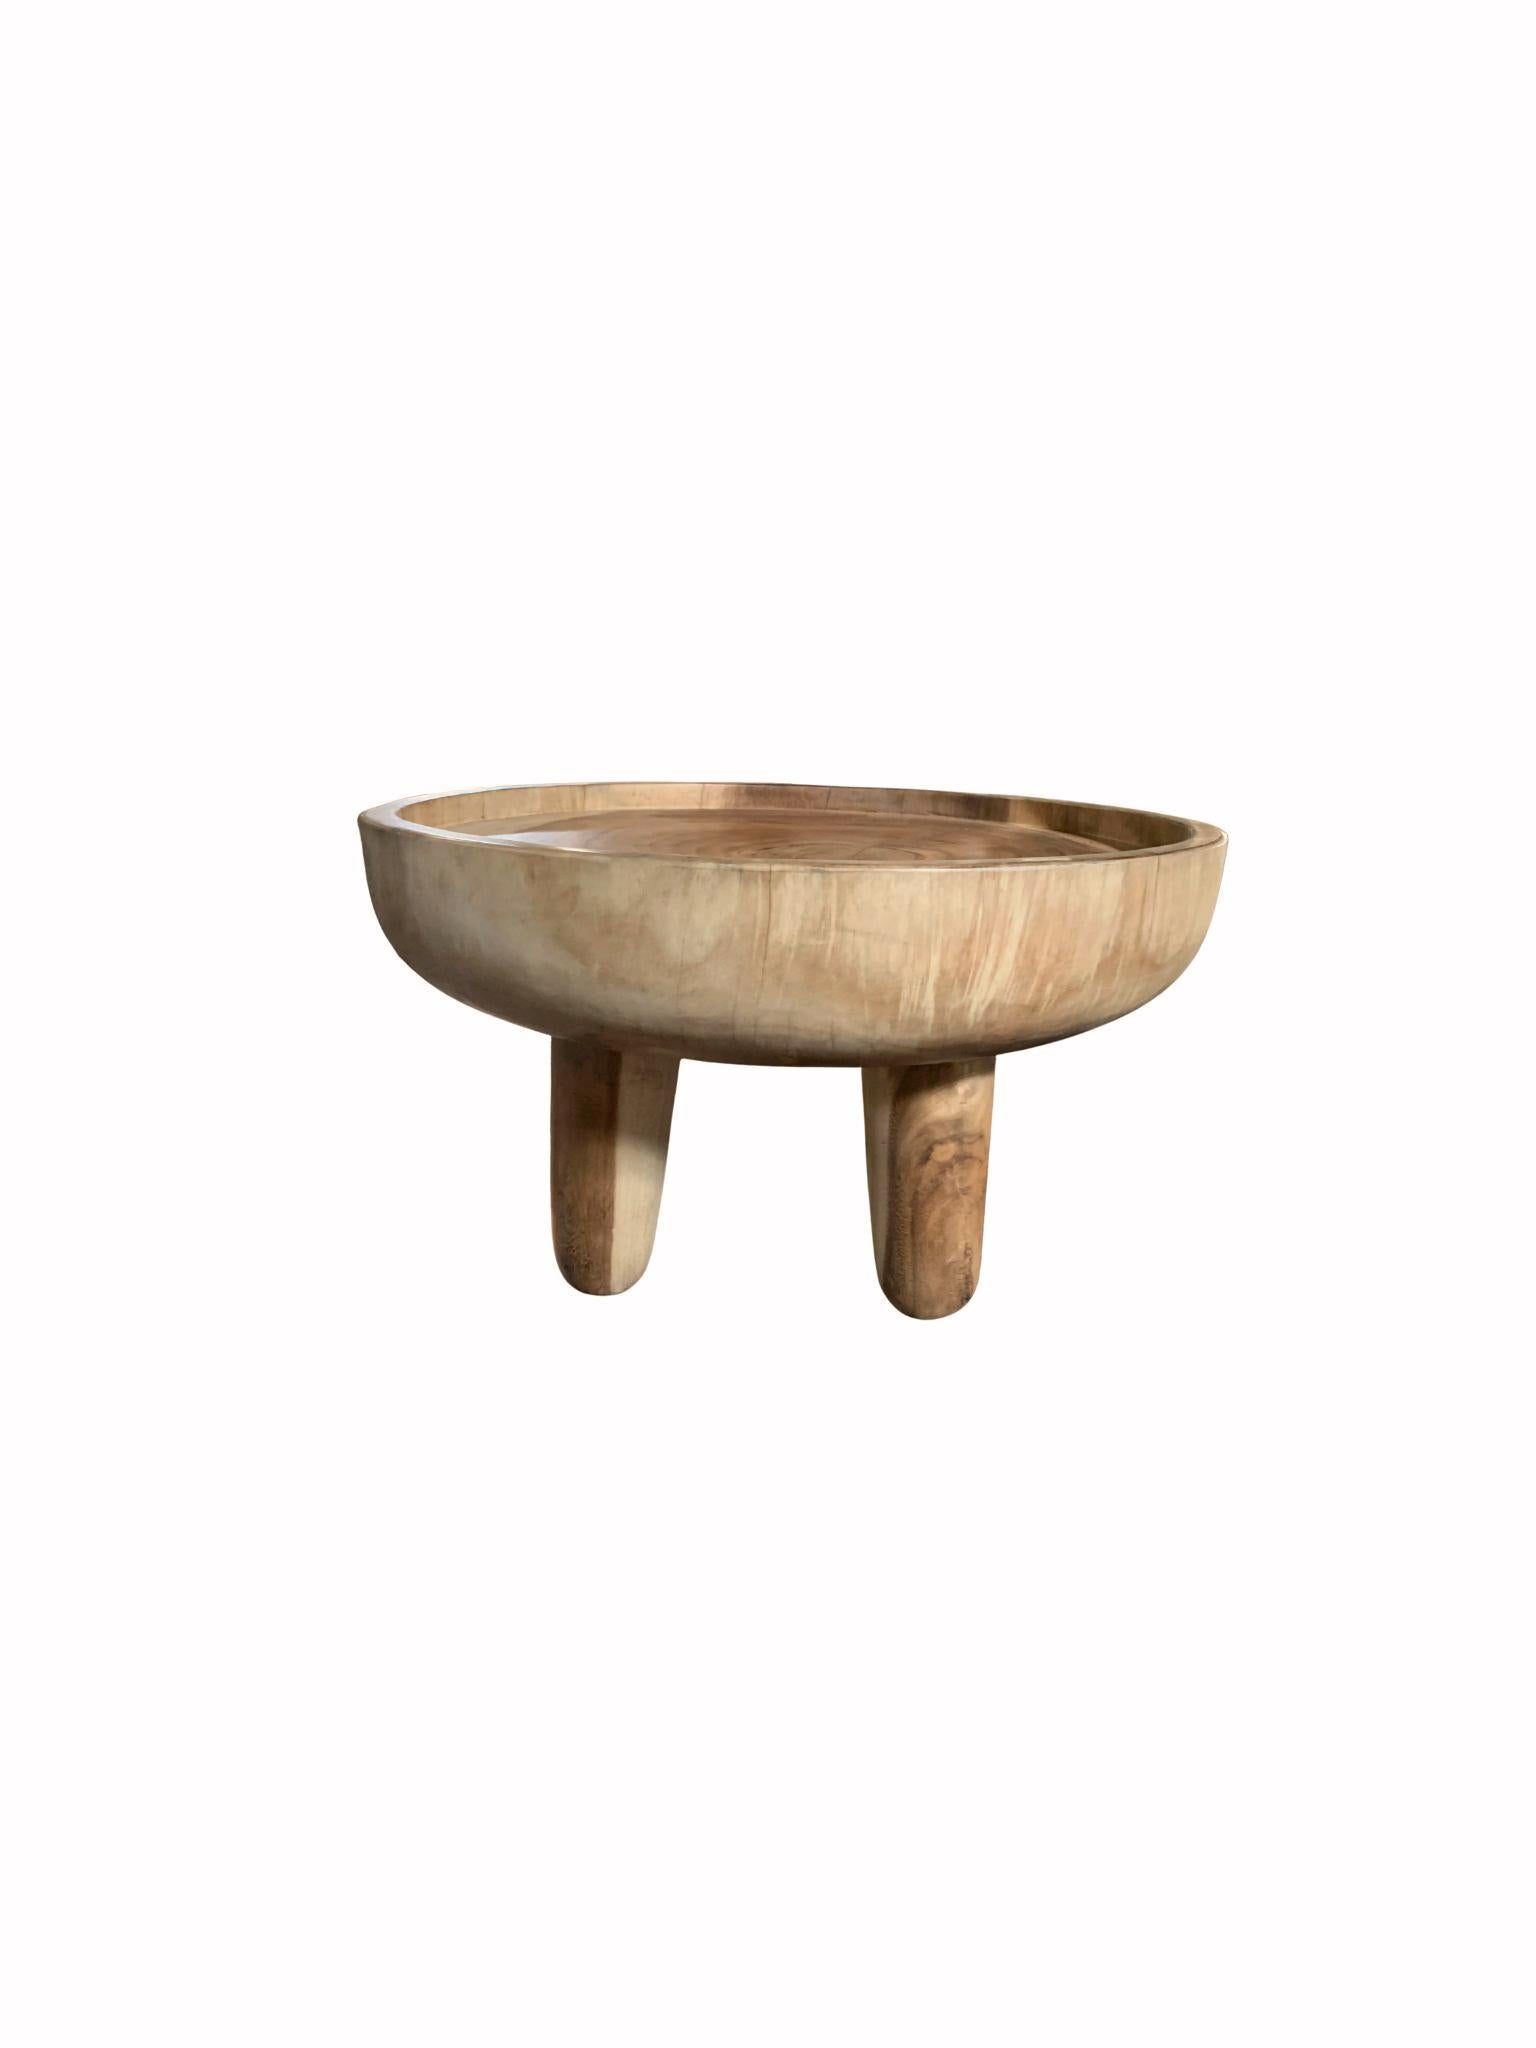 Indonesian Sculptural Round Side Table Solid Mango Wood Modern Organic For Sale